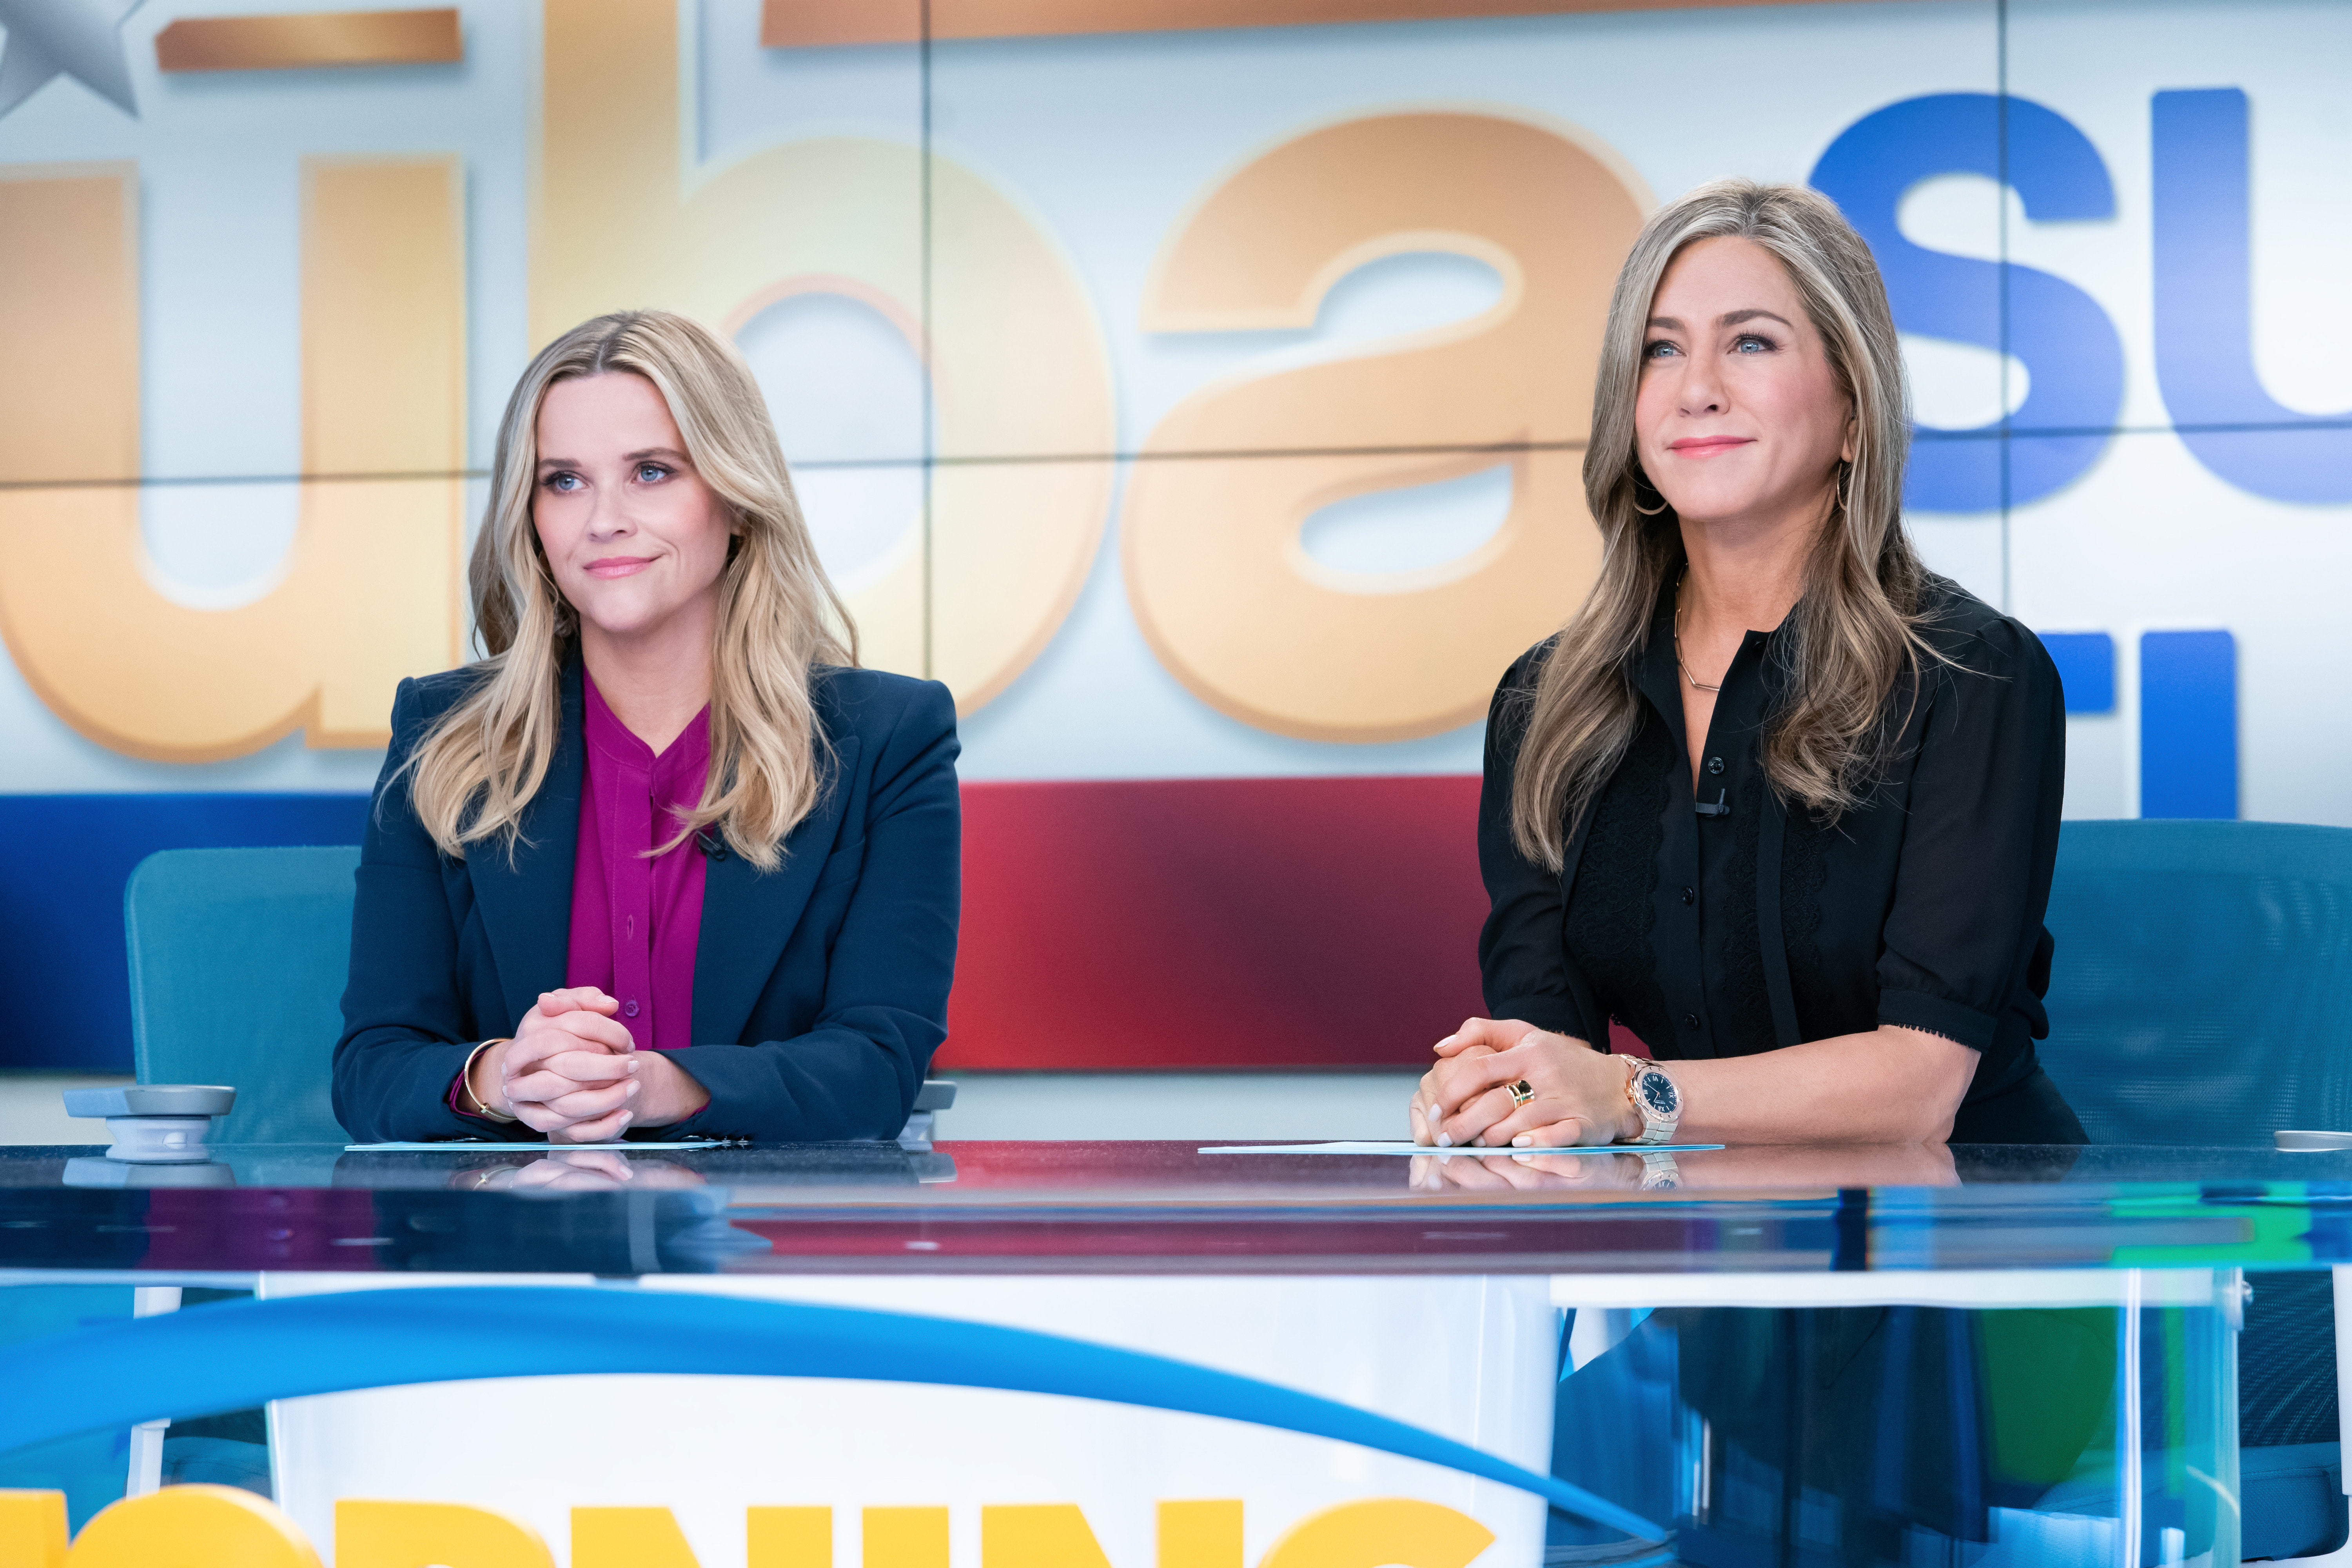 Reese Witherspoon and Jennifer Aniston in “The Morning Show,” now streaming on Apple TV Plus, one of the returning shows of 2022/23